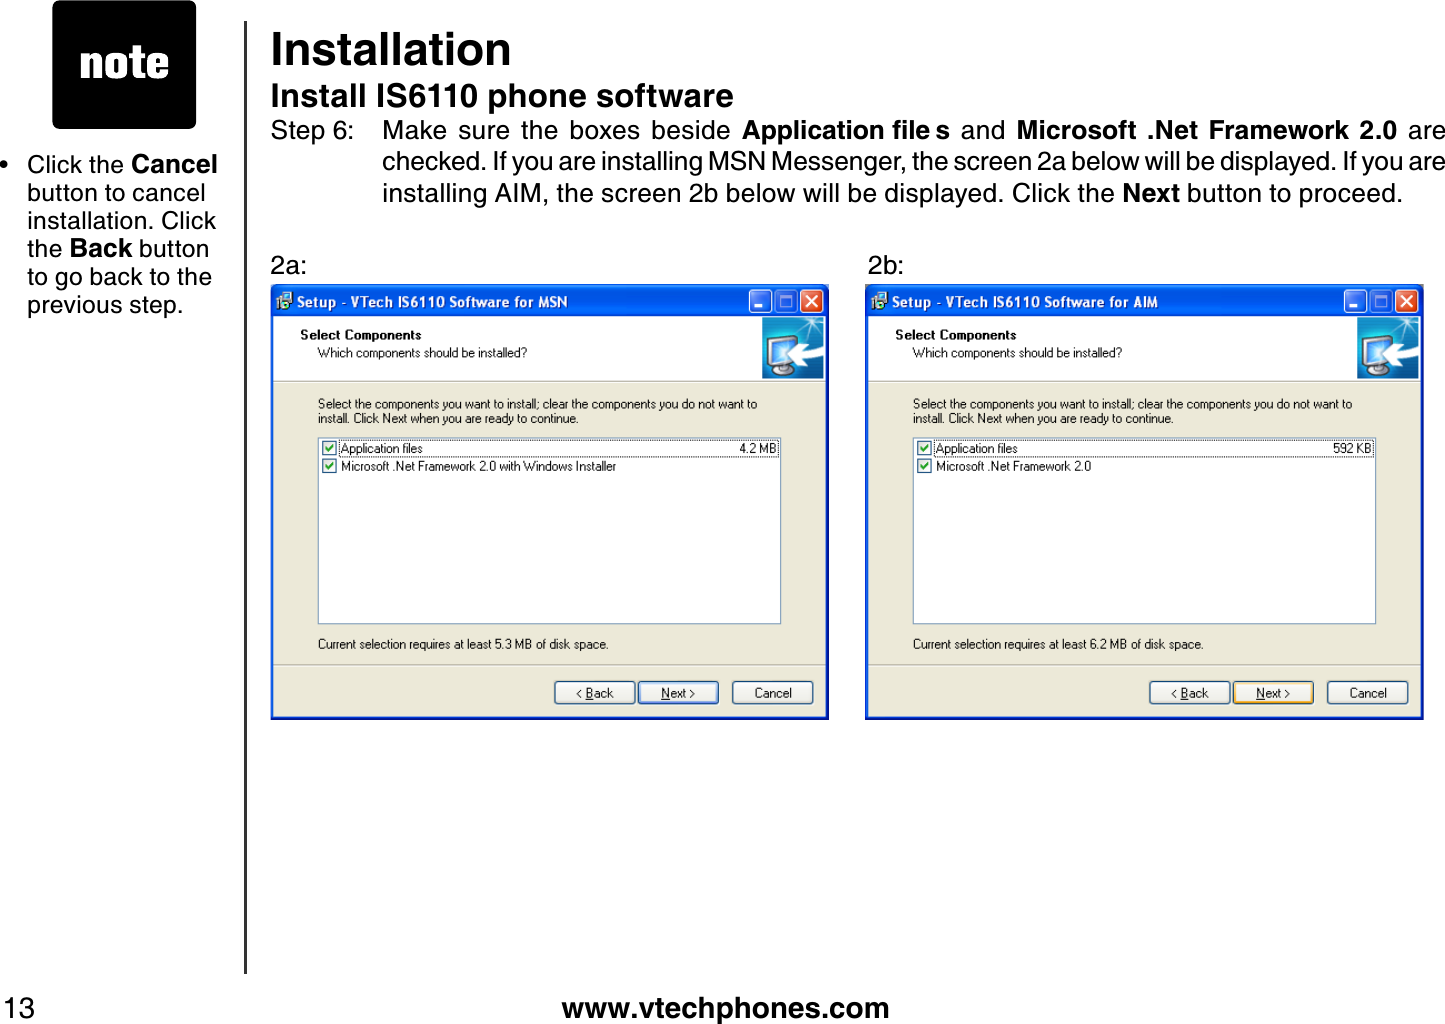 www.vtechphones.com13InstallationInstall IS6110 phone softwareStep 6: Make  sure  the  boxes  beside  #RRNKECVKQPſNG U  and  Microsoft .Net  Framework 2.0  are checked. If you are installing MSN Messenger, the screen 2a below will be displayed. If you are installing AIM, the screen 2b below will be displayed. Click the Next button to proceed.2a:                           2b:Click the Cancel button to cancel installation. Click the Back button to go back to the previous step.•